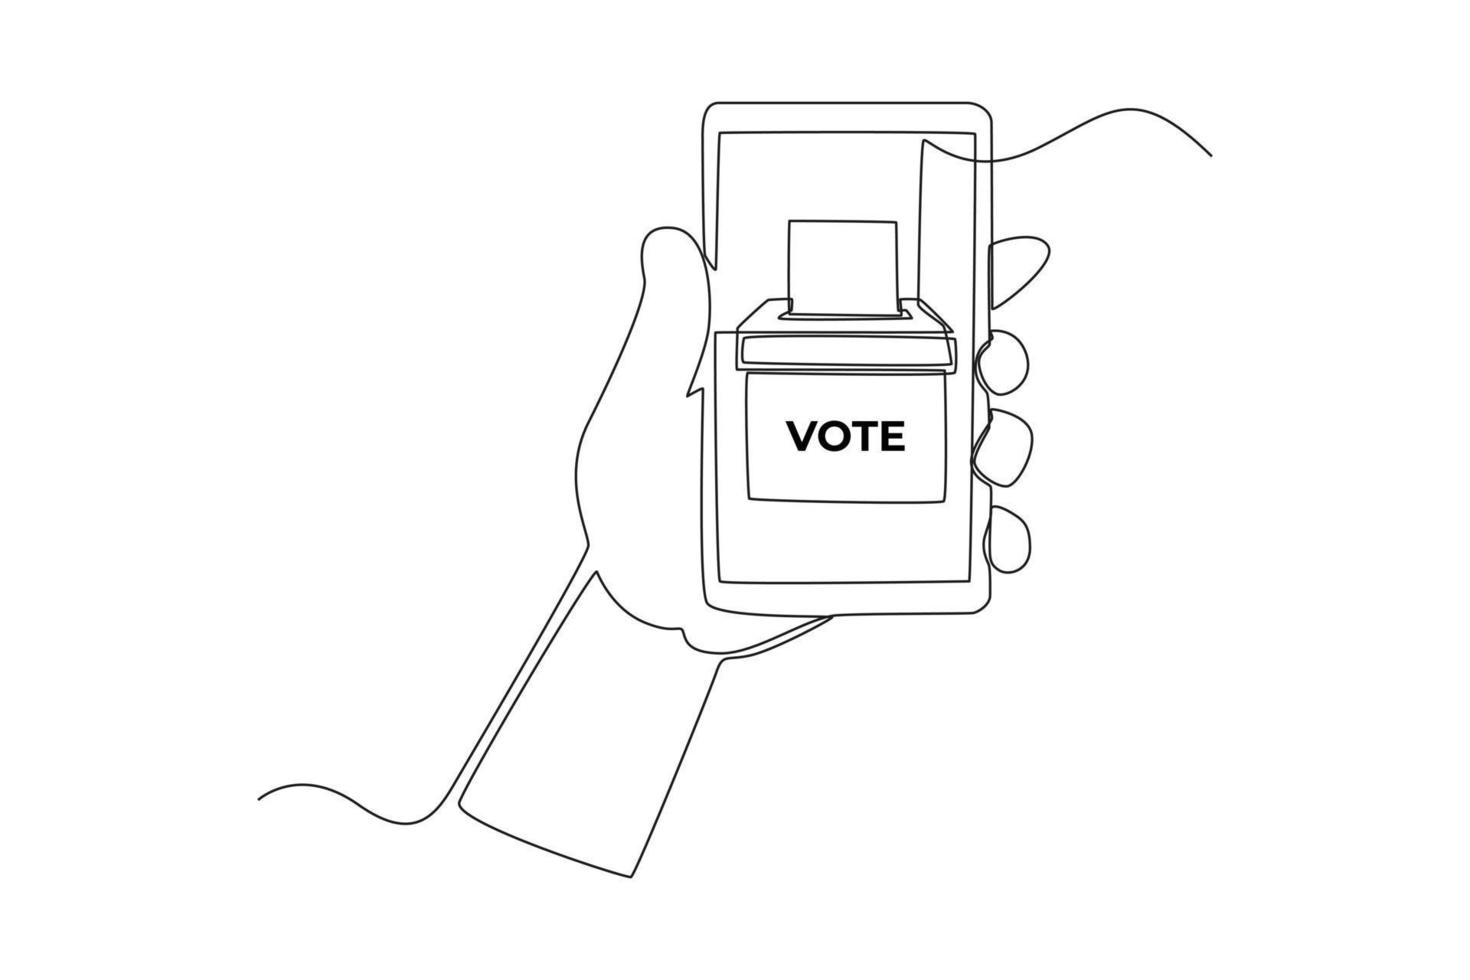 Continuous one line drawing online voting in smartphone for General Regional or Presidential Election. Voting concept. Single line draw design vector graphic illustration.